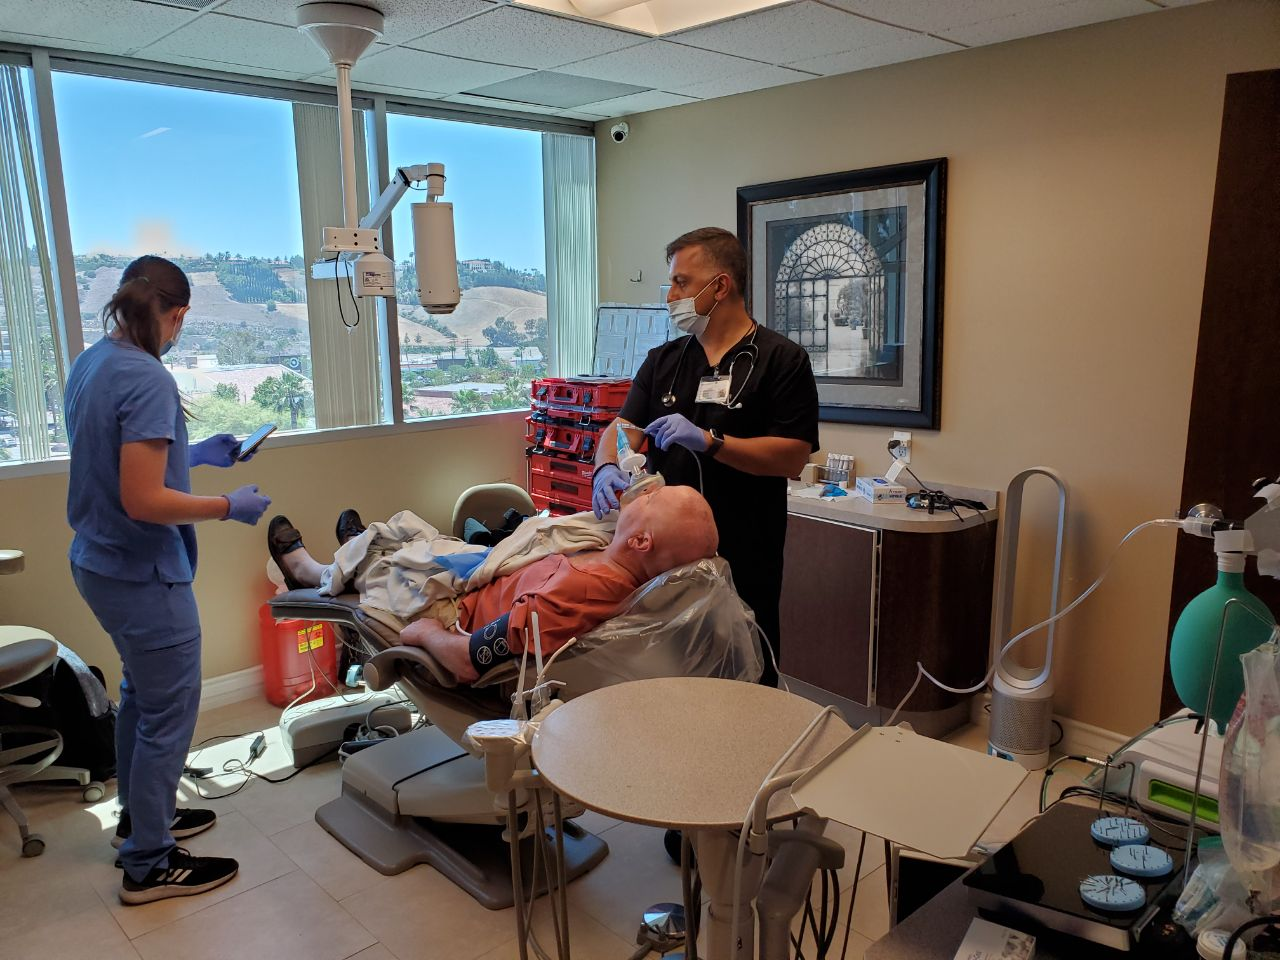 An experienced dentist providing extensive dental treatment to a patient